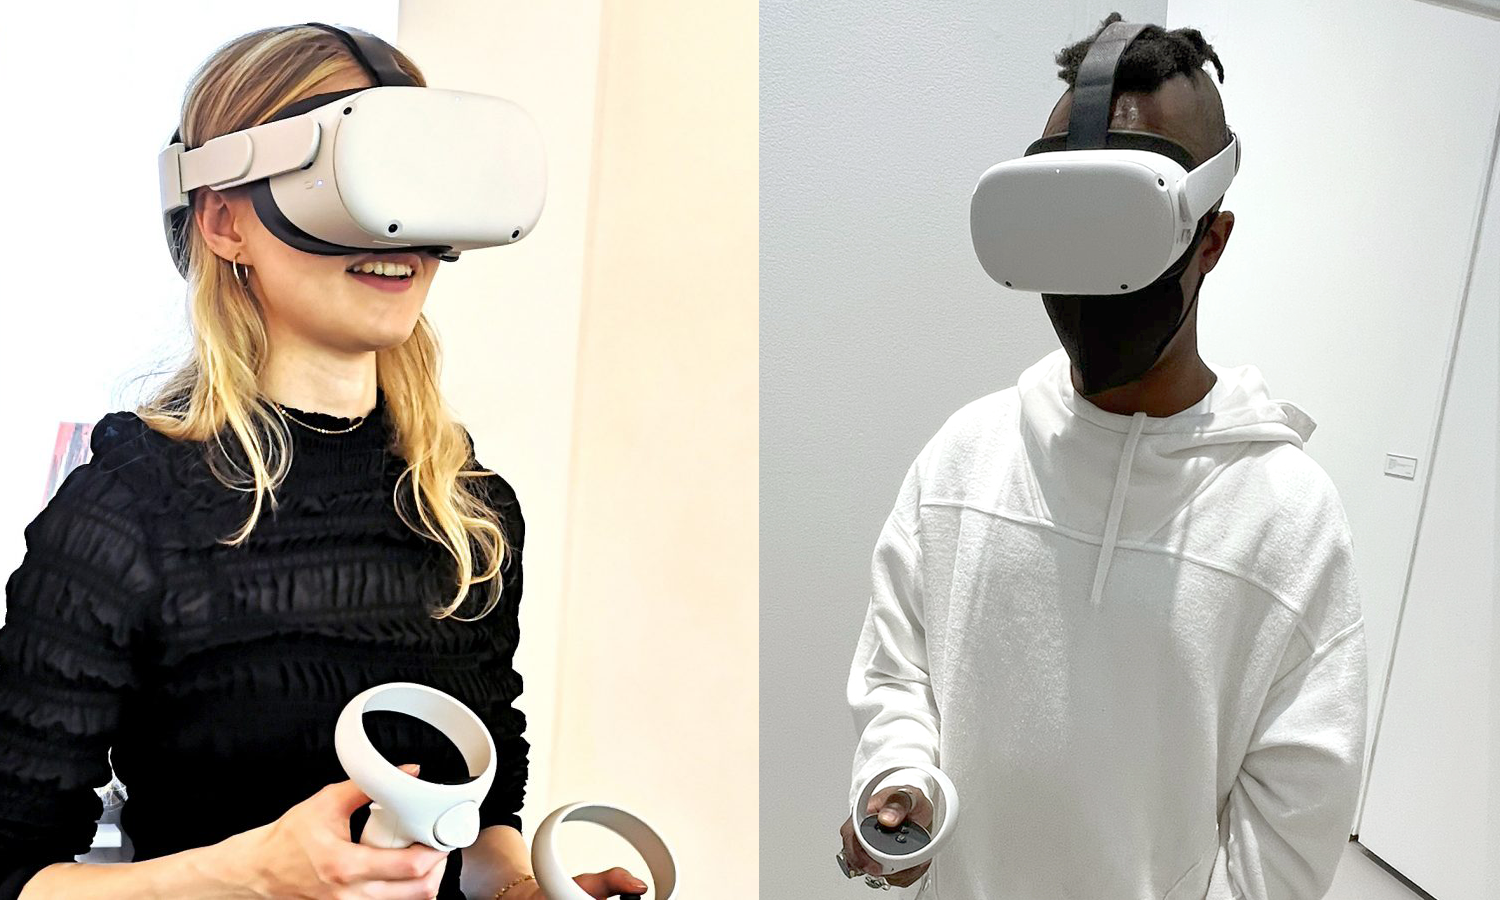 Two images next two each other. A woman wearing black and a man wearing white are both wearing VR headsets in different locations